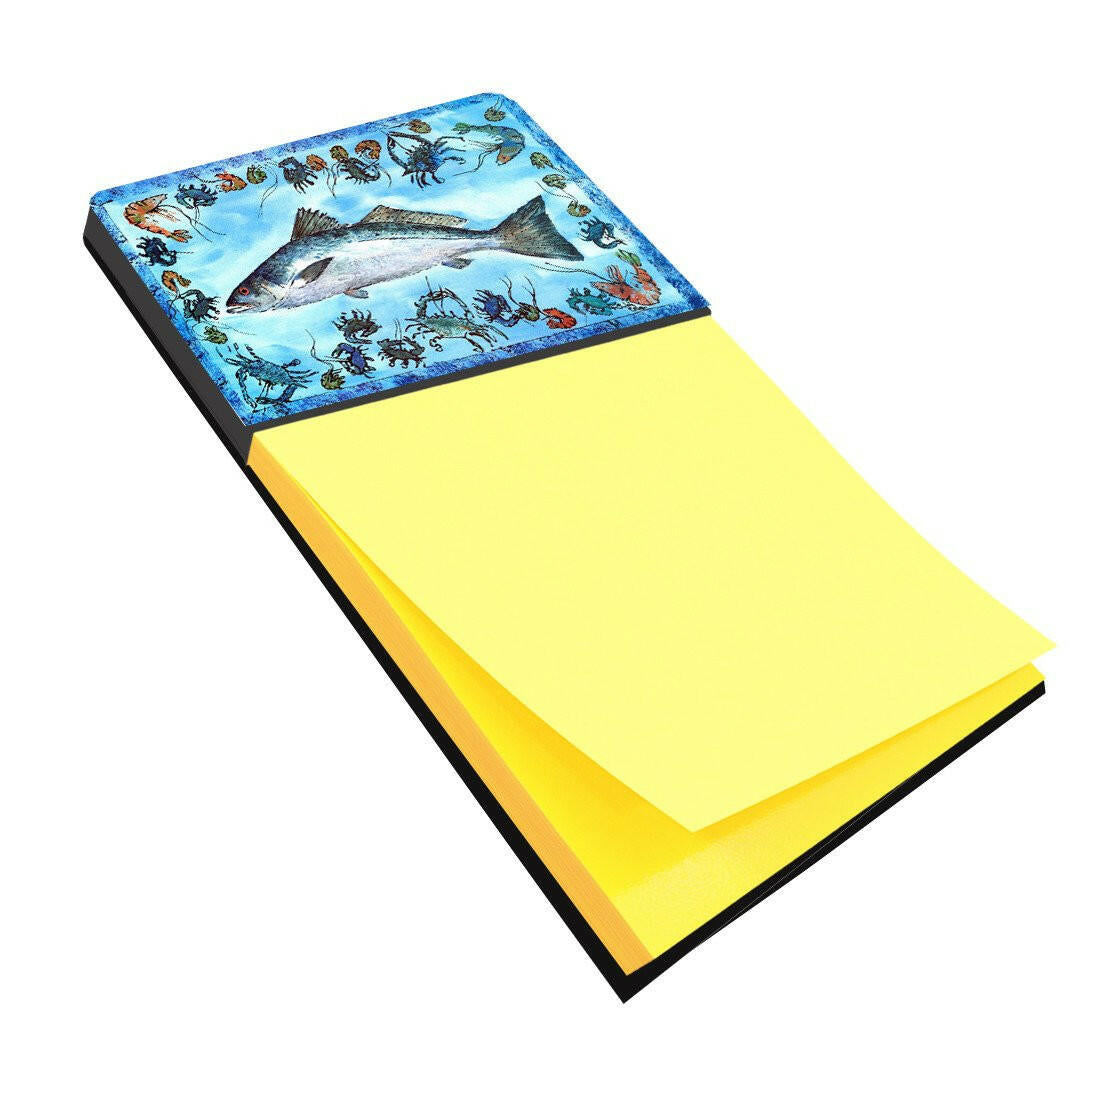 Fish Speckled Trout Refiillable Sticky Note Holder or Postit Note Dispenser 8086SN by Caroline's Treasures